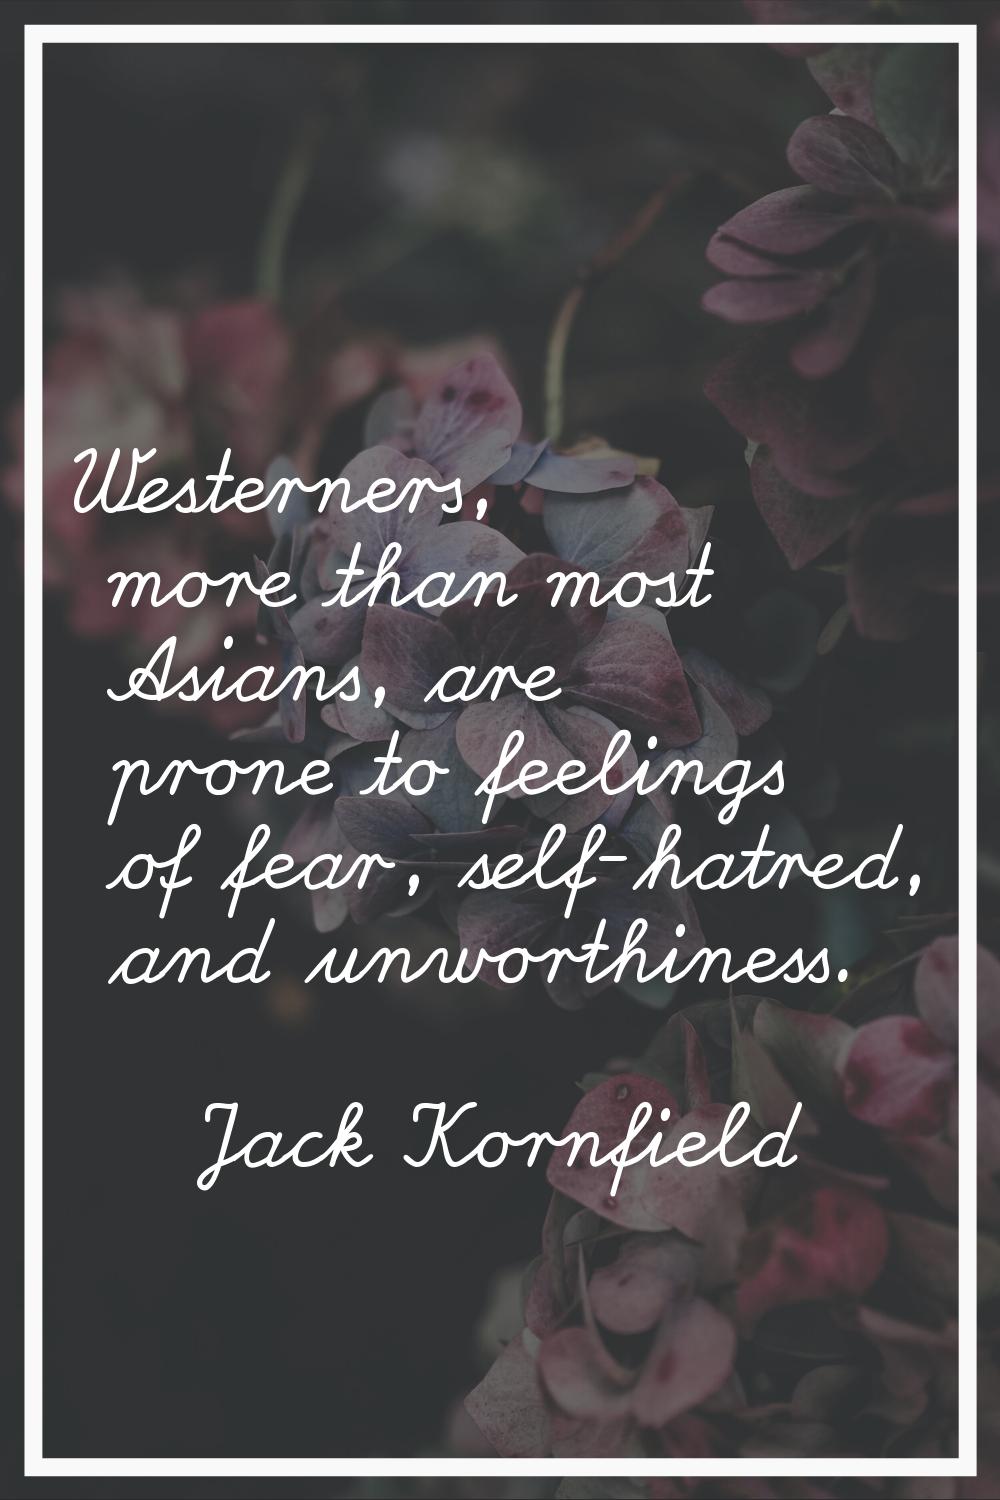 Westerners, more than most Asians, are prone to feelings of fear, self-hatred, and unworthiness.